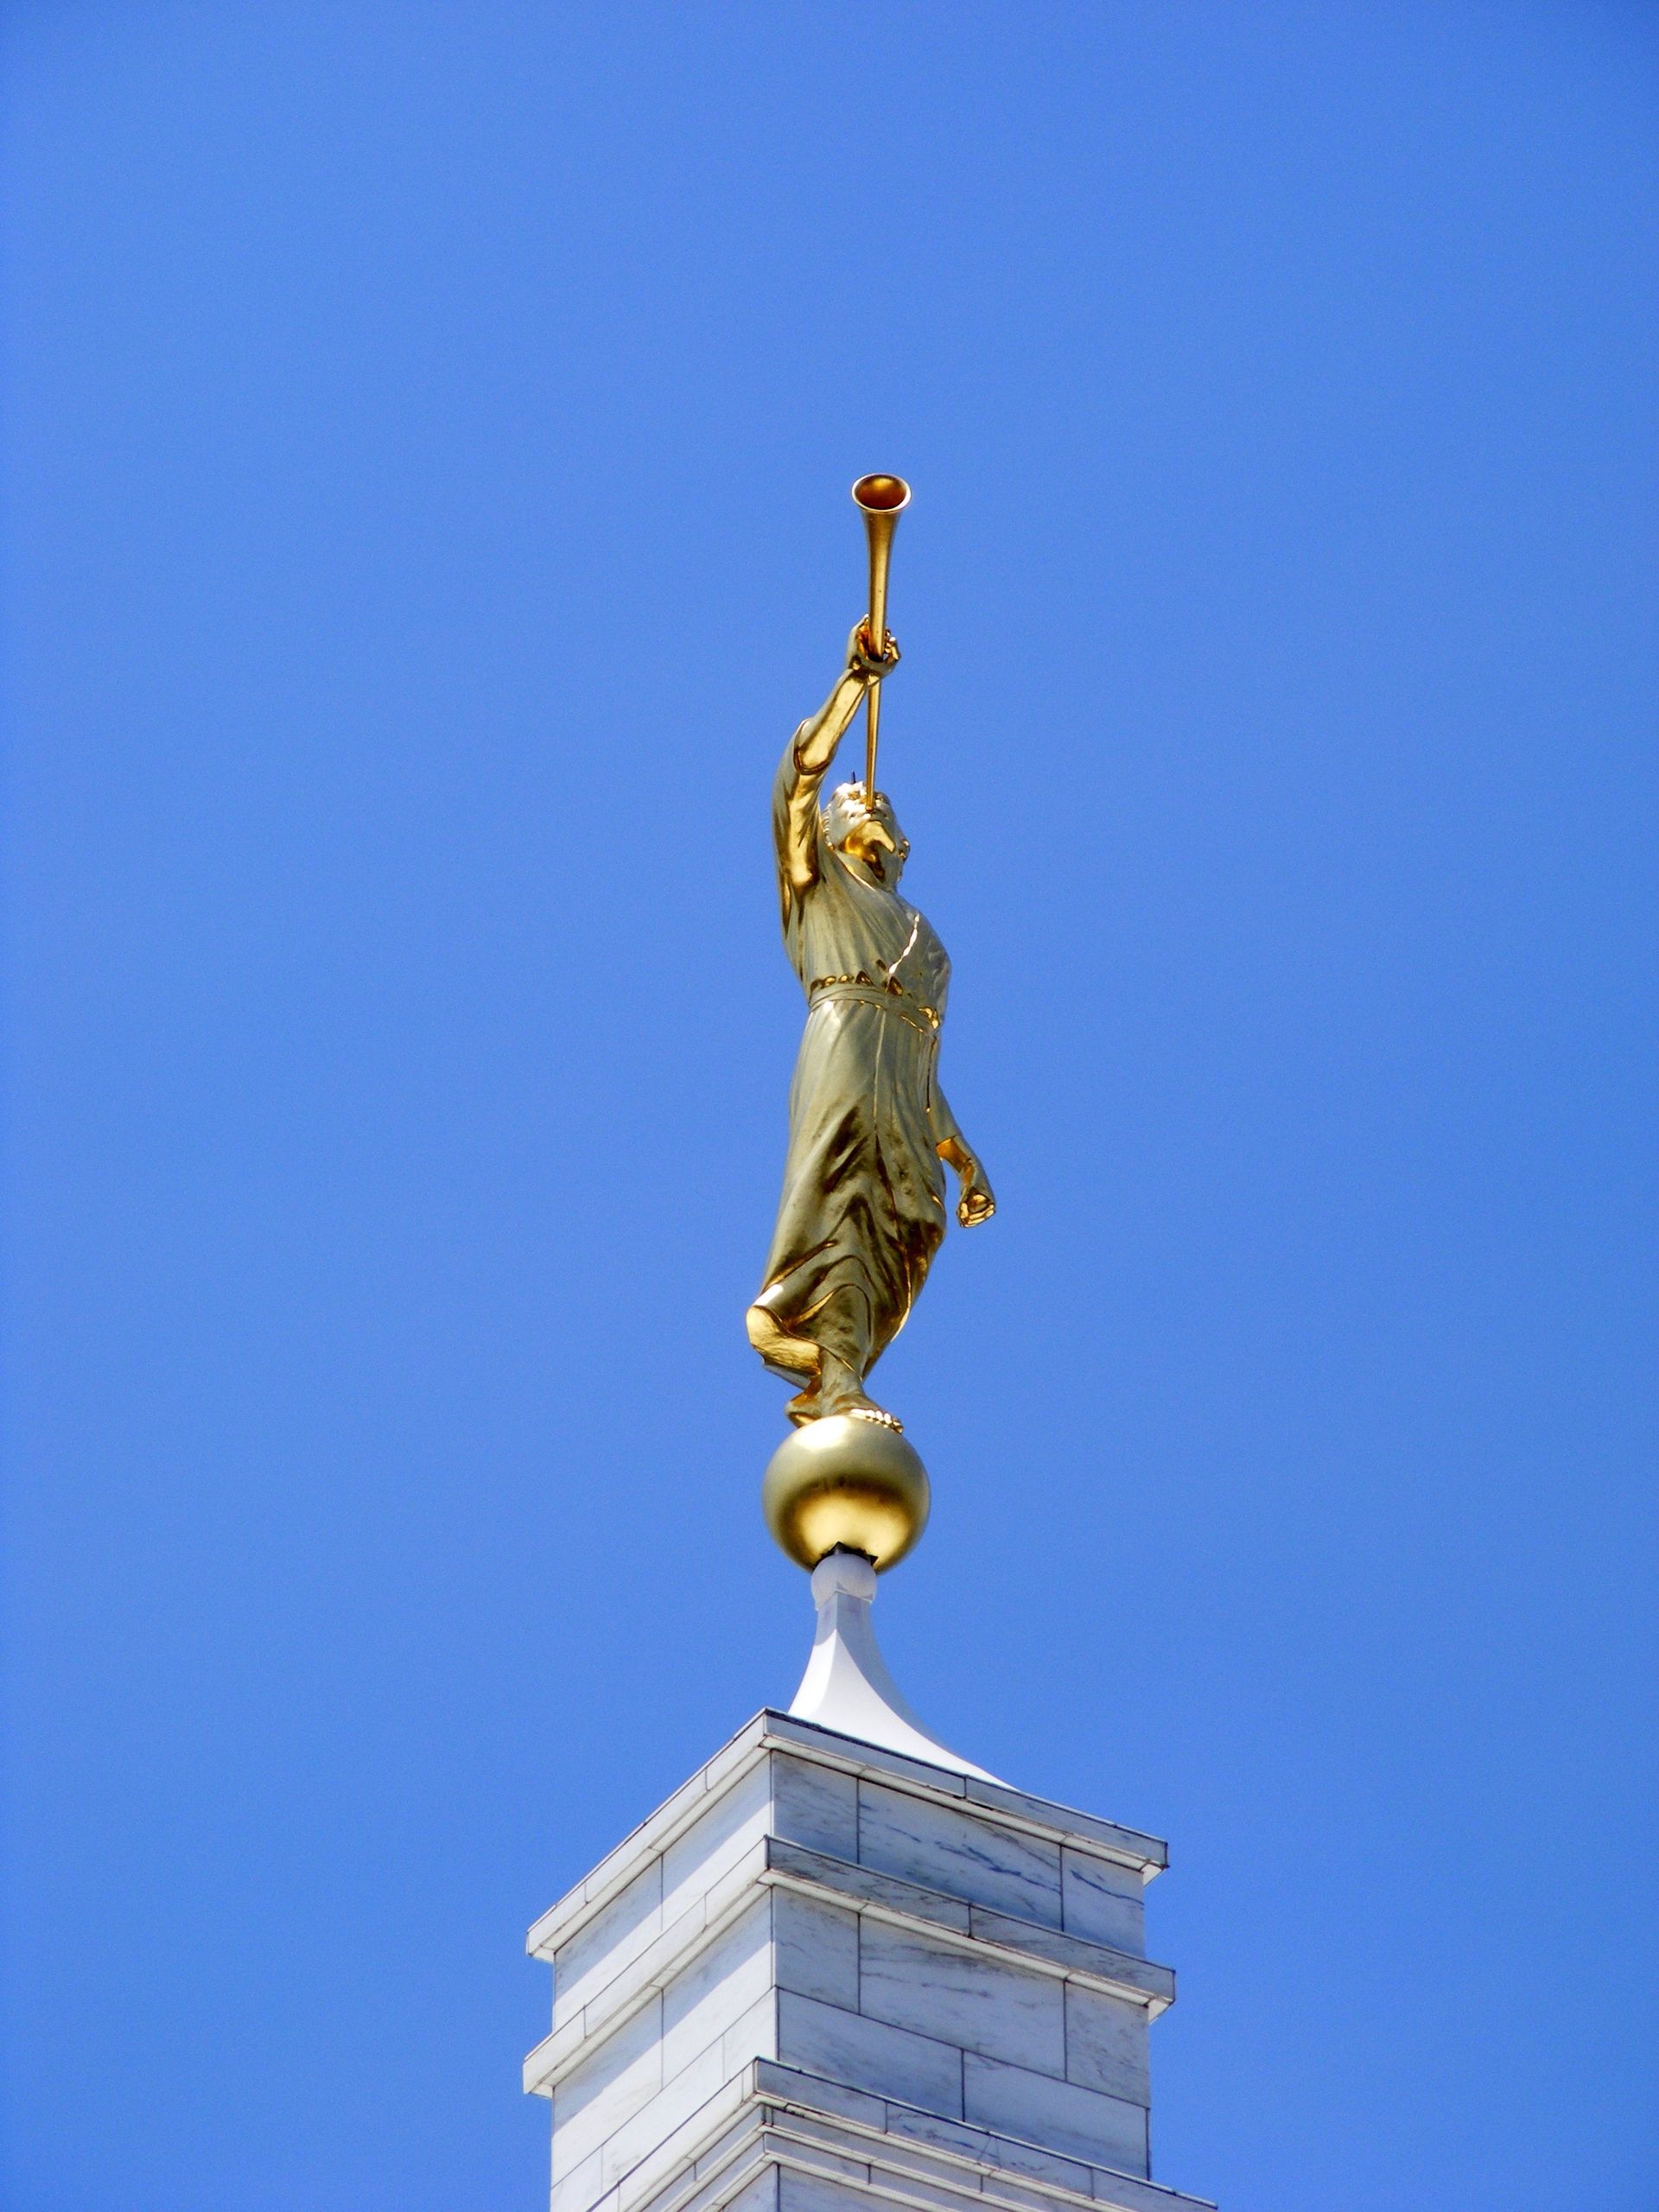 An image of the angel Moroni statue on top of the Raleigh North Carolina Temple.